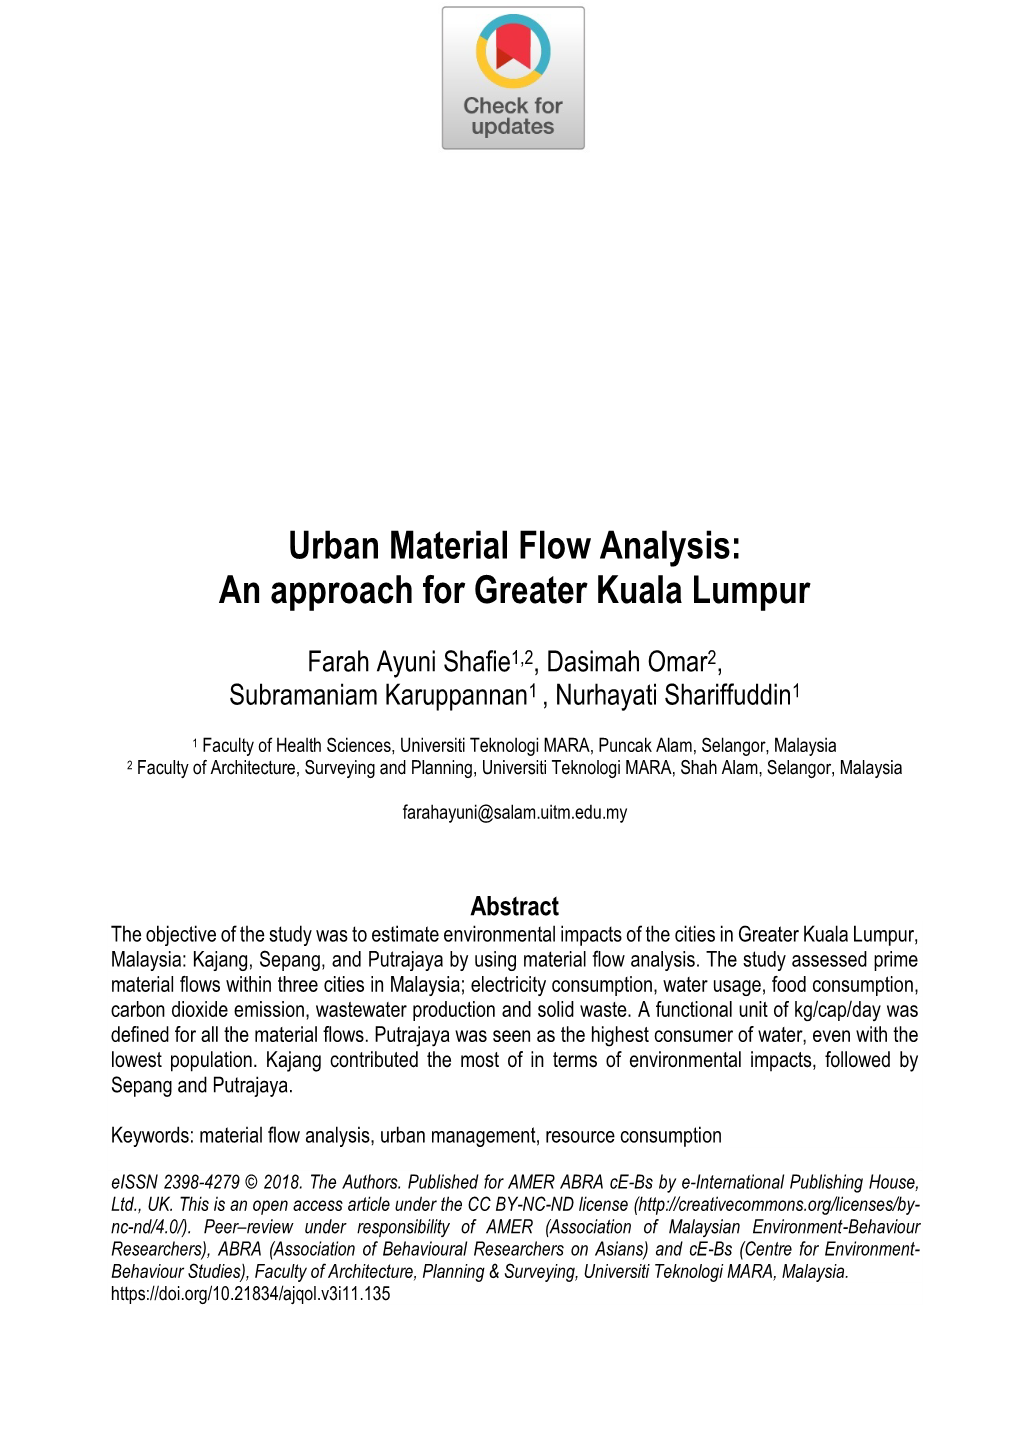 Urban Material Flow Analysis: an Approach for Greater Kuala Lumpur